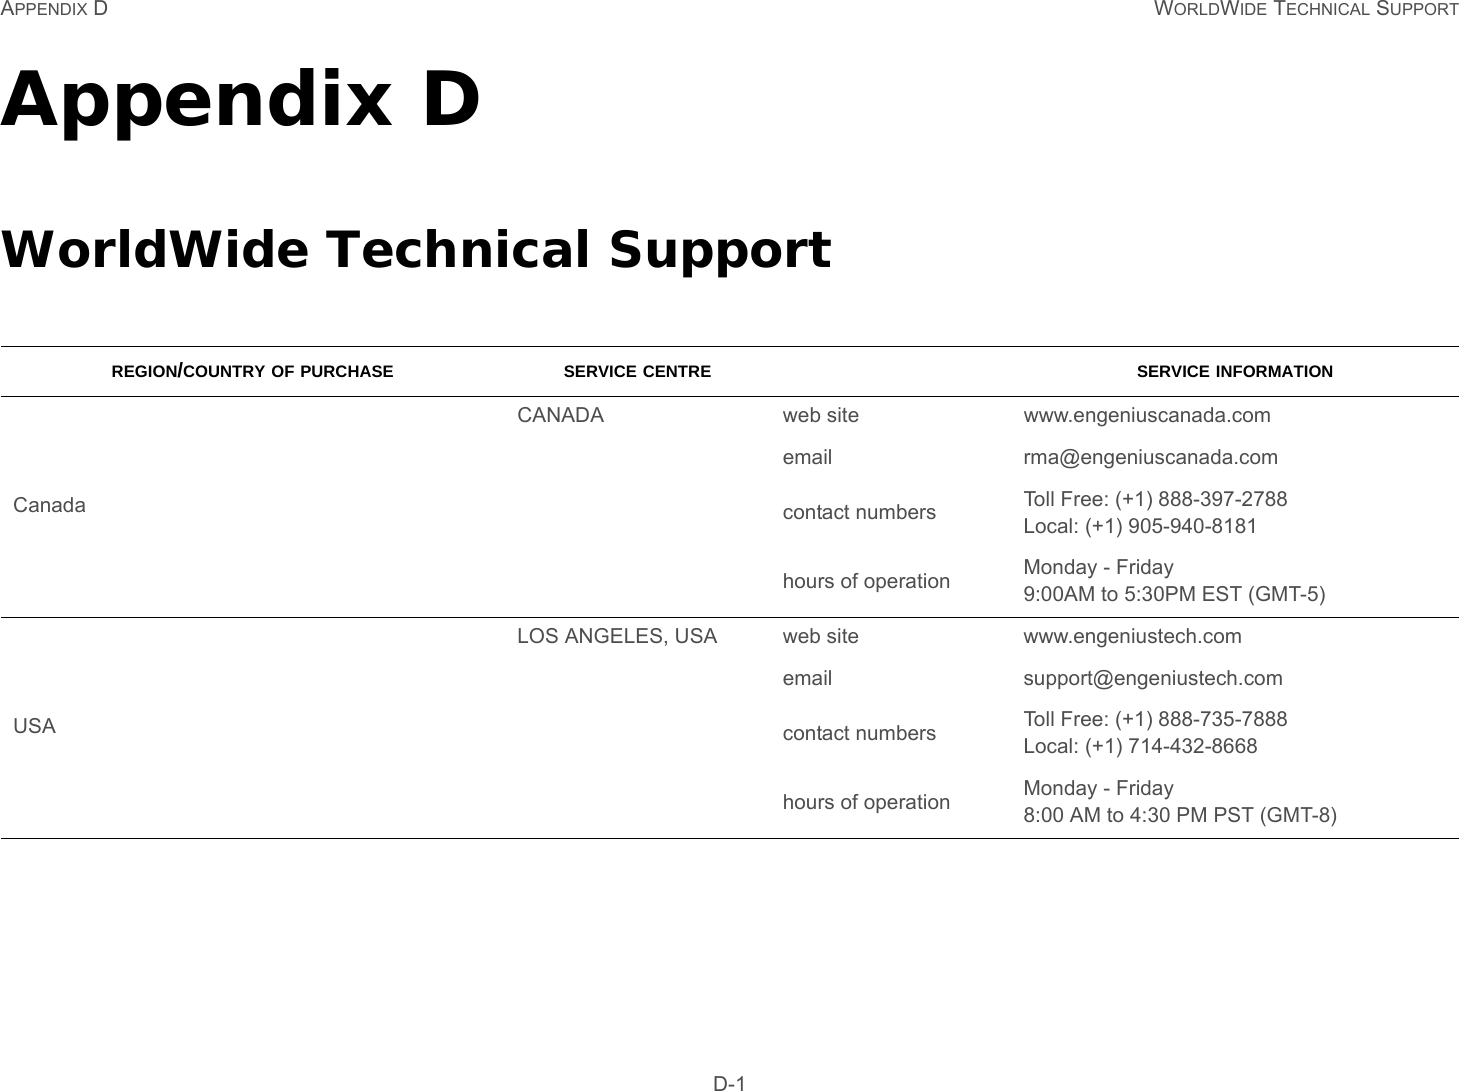 APPENDIX D WORLDWIDE TECHNICAL SUPPORT D-1Appendix DWorldWide Technical SupportREGION/COUNTRY OF PURCHASE SERVICE CENTRE SERVICE INFORMATIONCanadaCANADA web site www.engeniuscanada.comemail rma@engeniuscanada.comcontact numbers Toll Free: (+1) 888-397-2788Local: (+1) 905-940-8181hours of operation Monday - Friday9:00AM to 5:30PM EST (GMT-5)USALOS ANGELES, USA web site www.engeniustech.comemail support@engeniustech.comcontact numbers Toll Free: (+1) 888-735-7888Local: (+1) 714-432-8668hours of operation Monday - Friday8:00 AM to 4:30 PM PST (GMT-8)